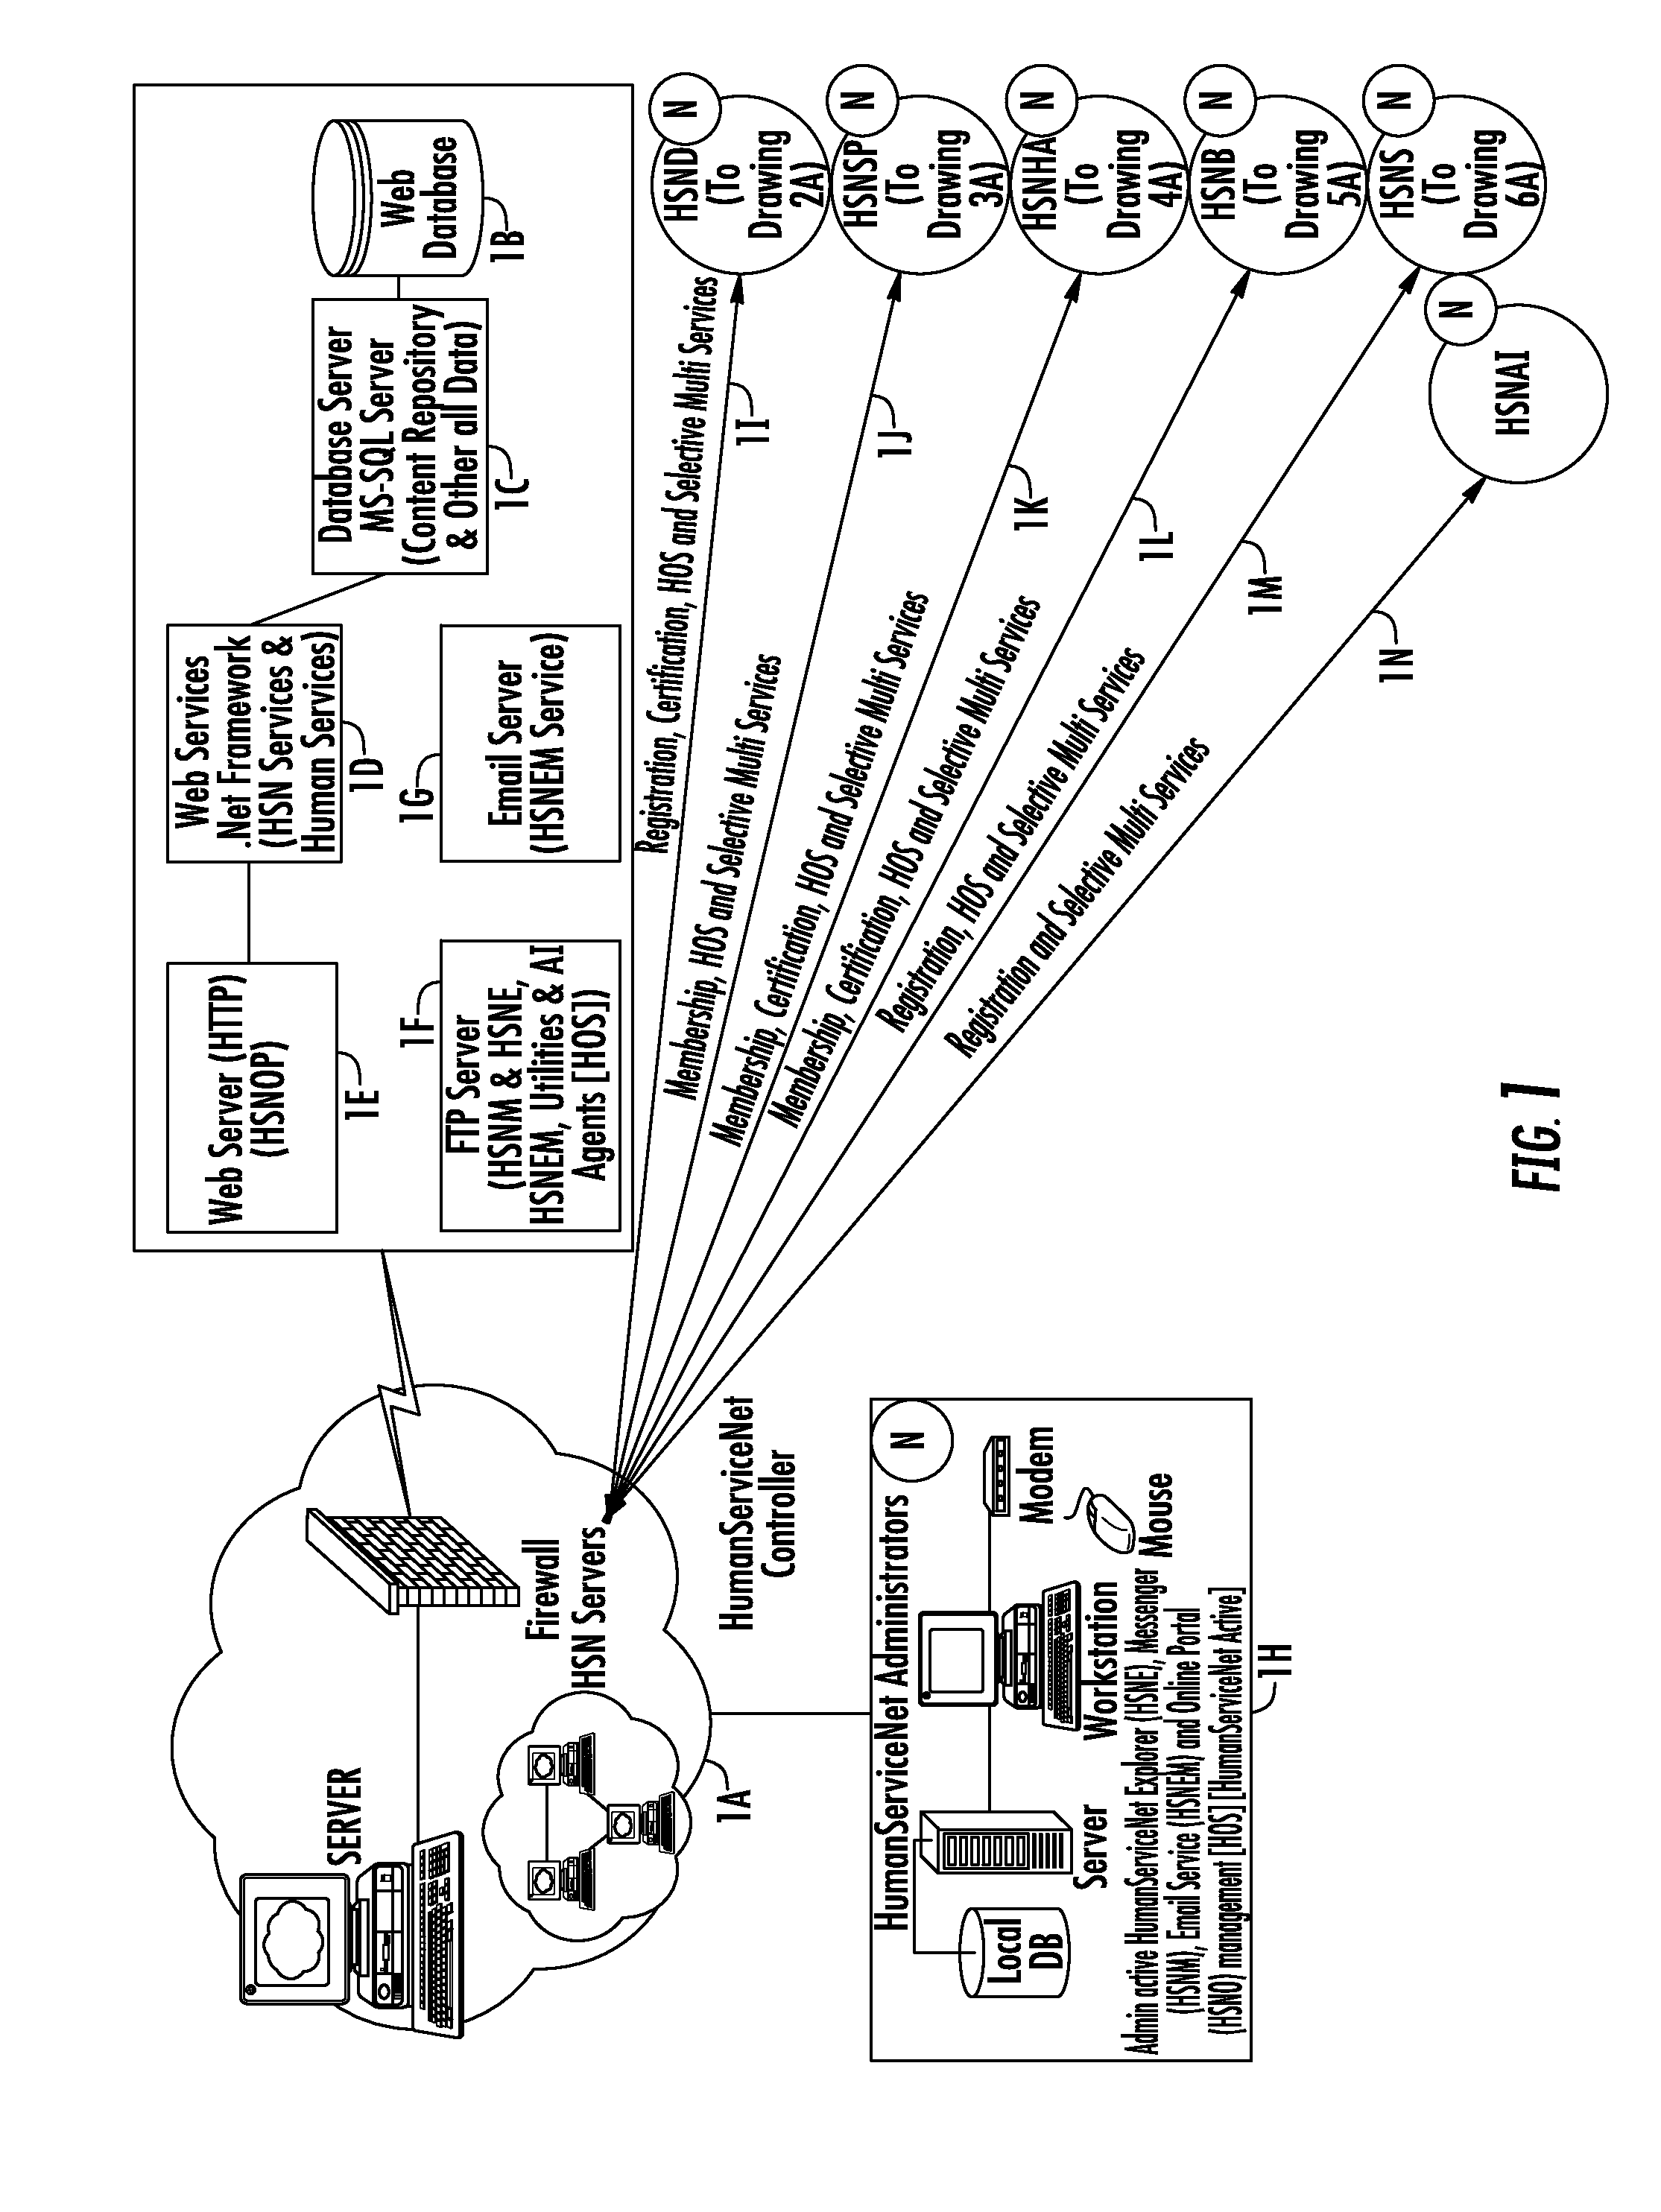 System and method of targeting advertisements and providing advertisements management